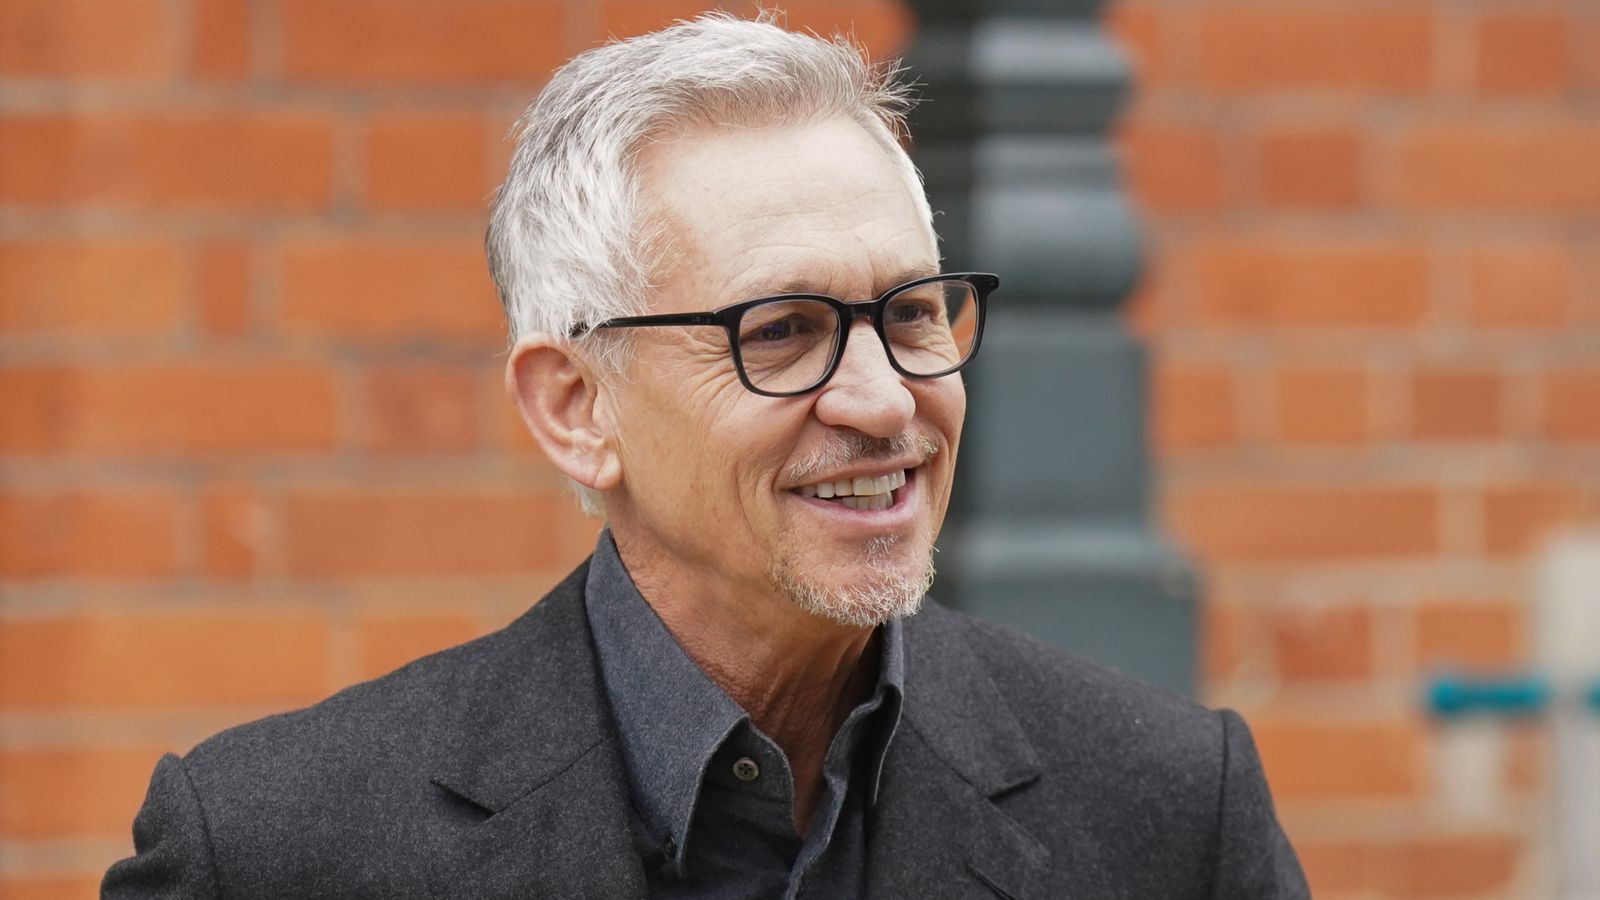 Gary Lineker stepping back from role as Match of the Day presenter